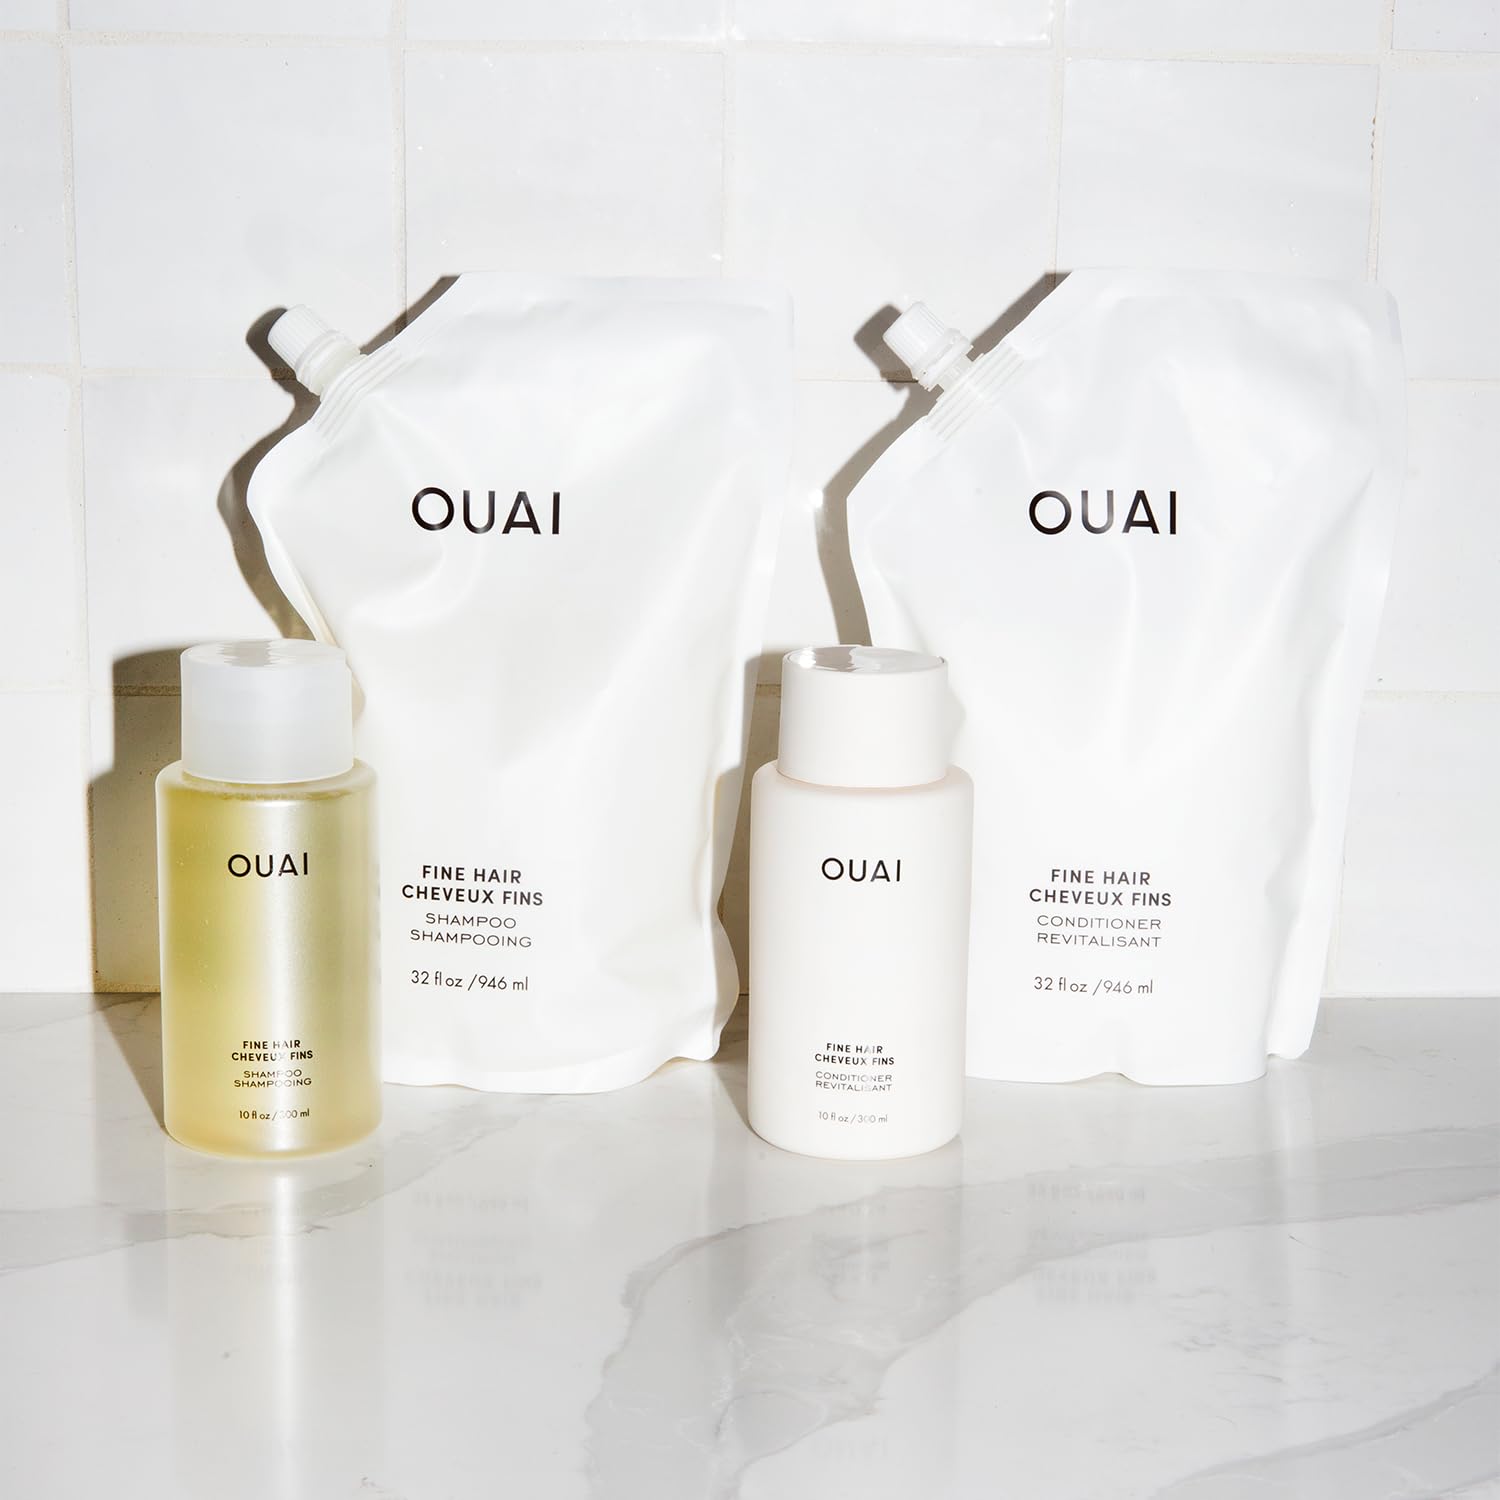 OUAI Fine Shampoo Refill - Volumizing Shampoo with Strengthening Keratin, Biotin & Chia Seed Oil for Fine Hair - Delivers Weightless Body - Paraben, Phthalate & Sulfate Free Hair Care - 32 fl oz : Beauty & Personal Care